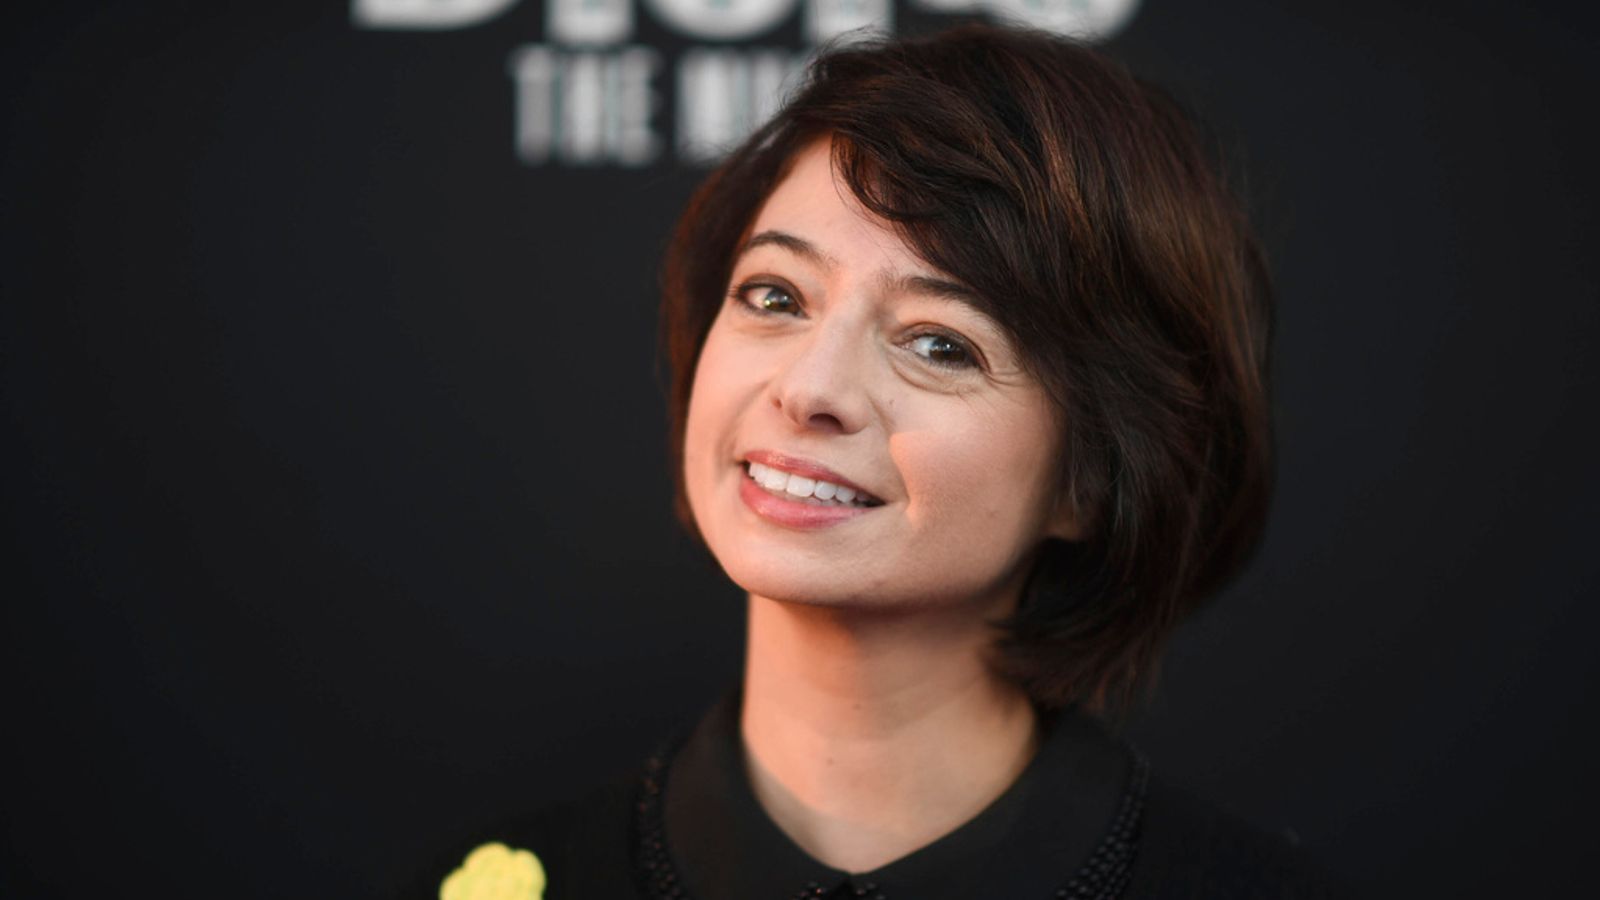 The Big Bang Theory actress Kate Micucci has surgery after being diagnosed with lung cancer